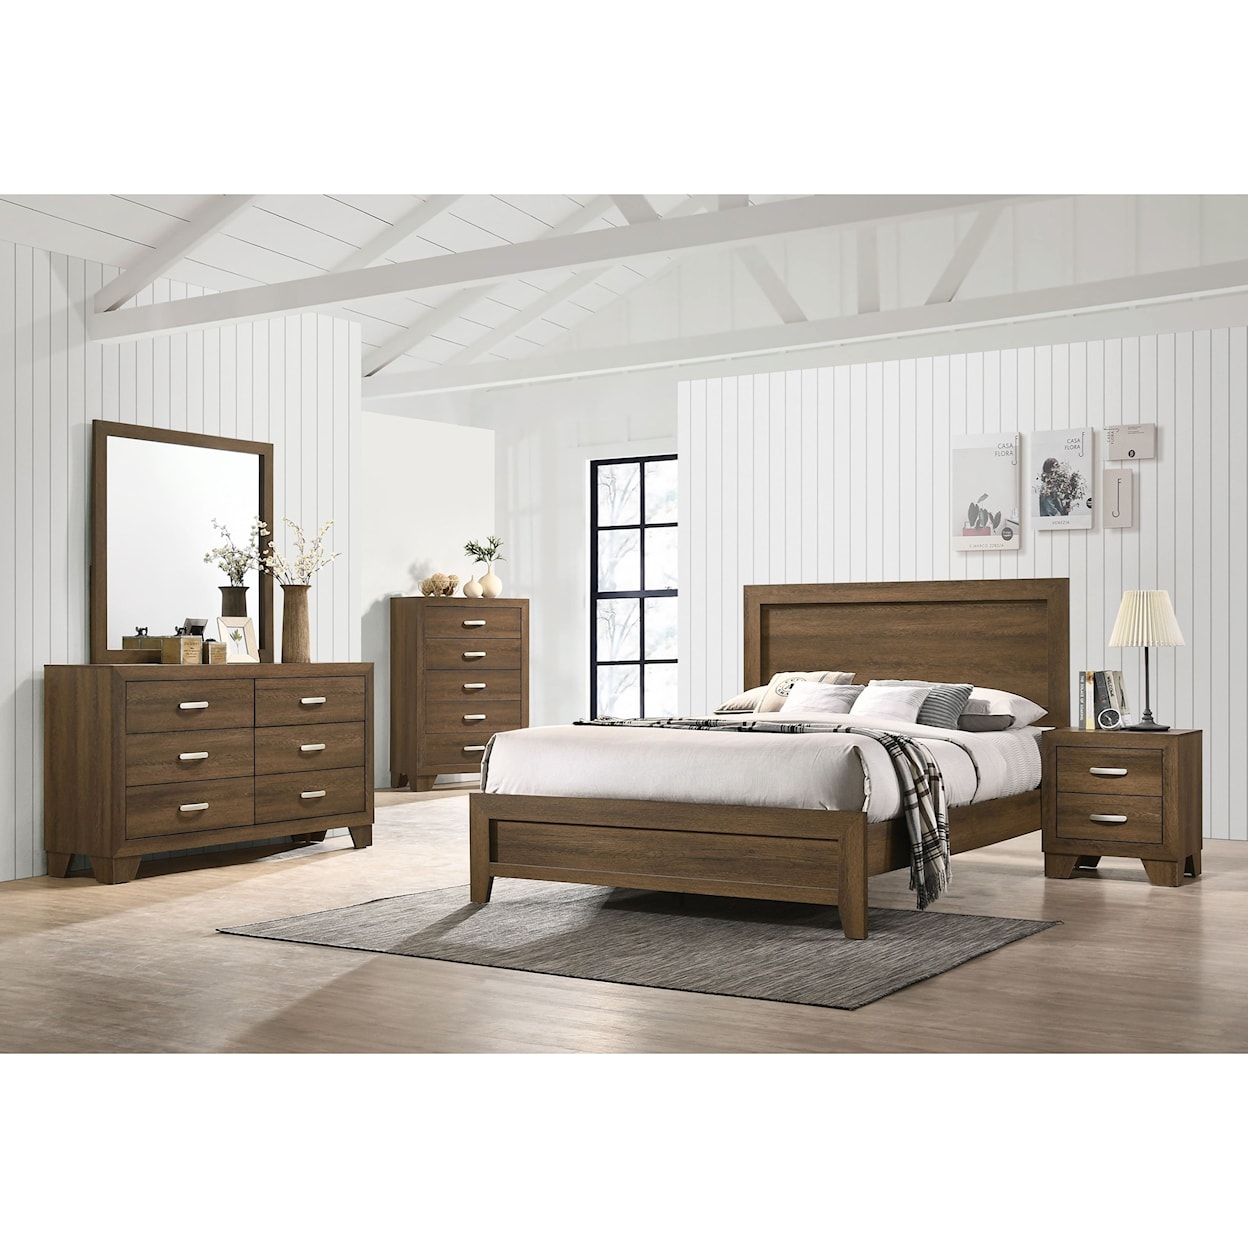 Acme Furniture Miquell Queen Bedroom Group